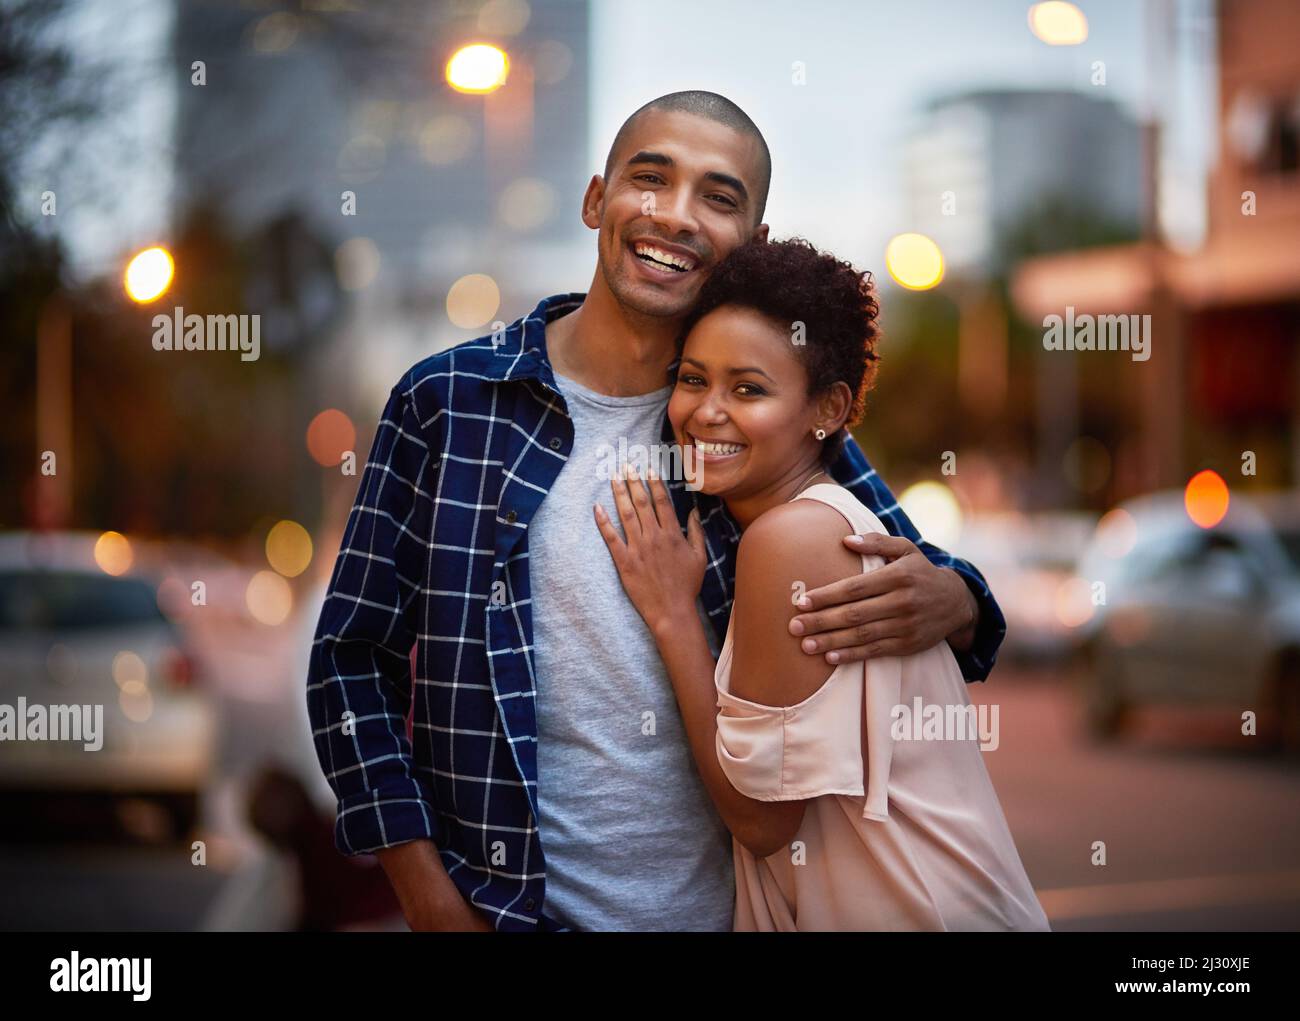 We love being out on the town. Cropped portrait of an affectionate young couple out on a date in the city. Stock Photo